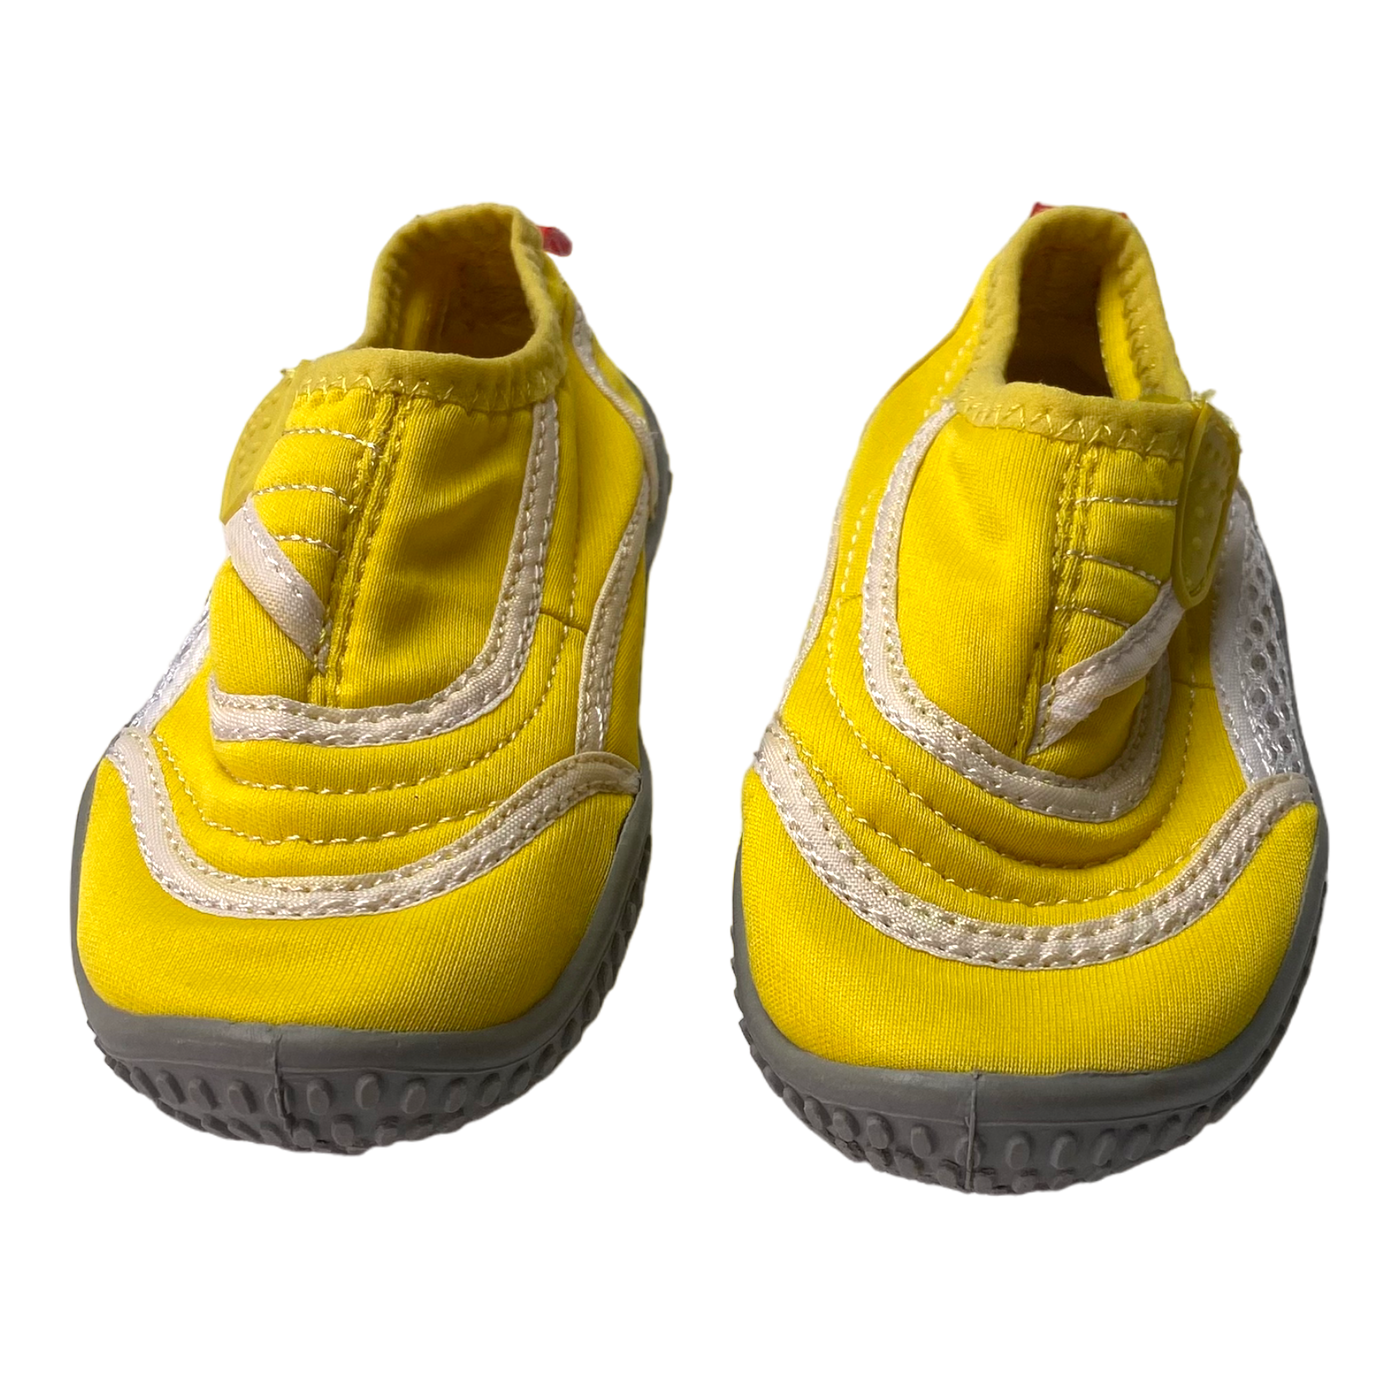 Reima water shoes, yellow | 25